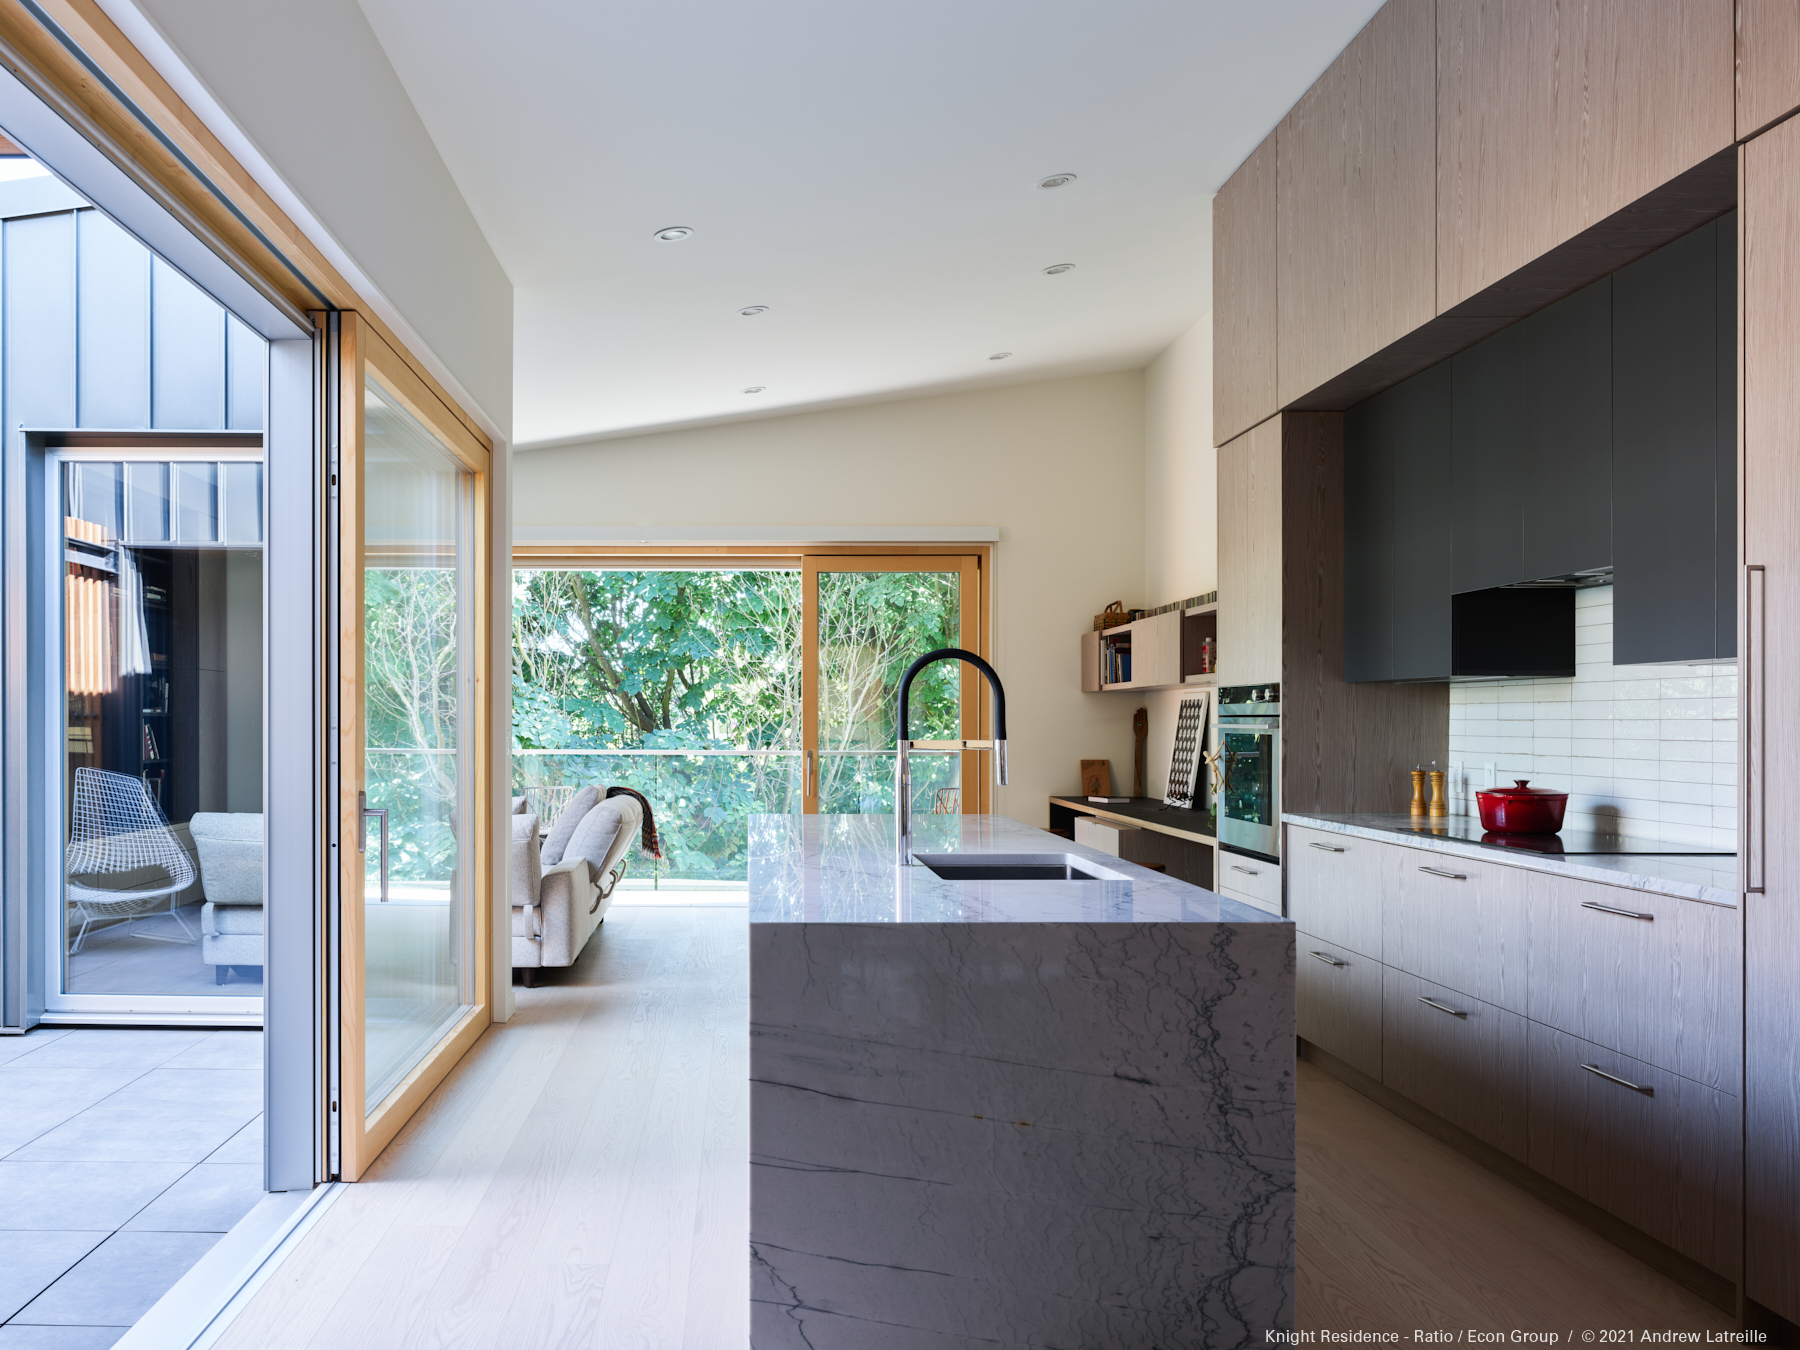 Knight Residence, Vancouver, by Marcel Studer, Econ Group Construction and Development.